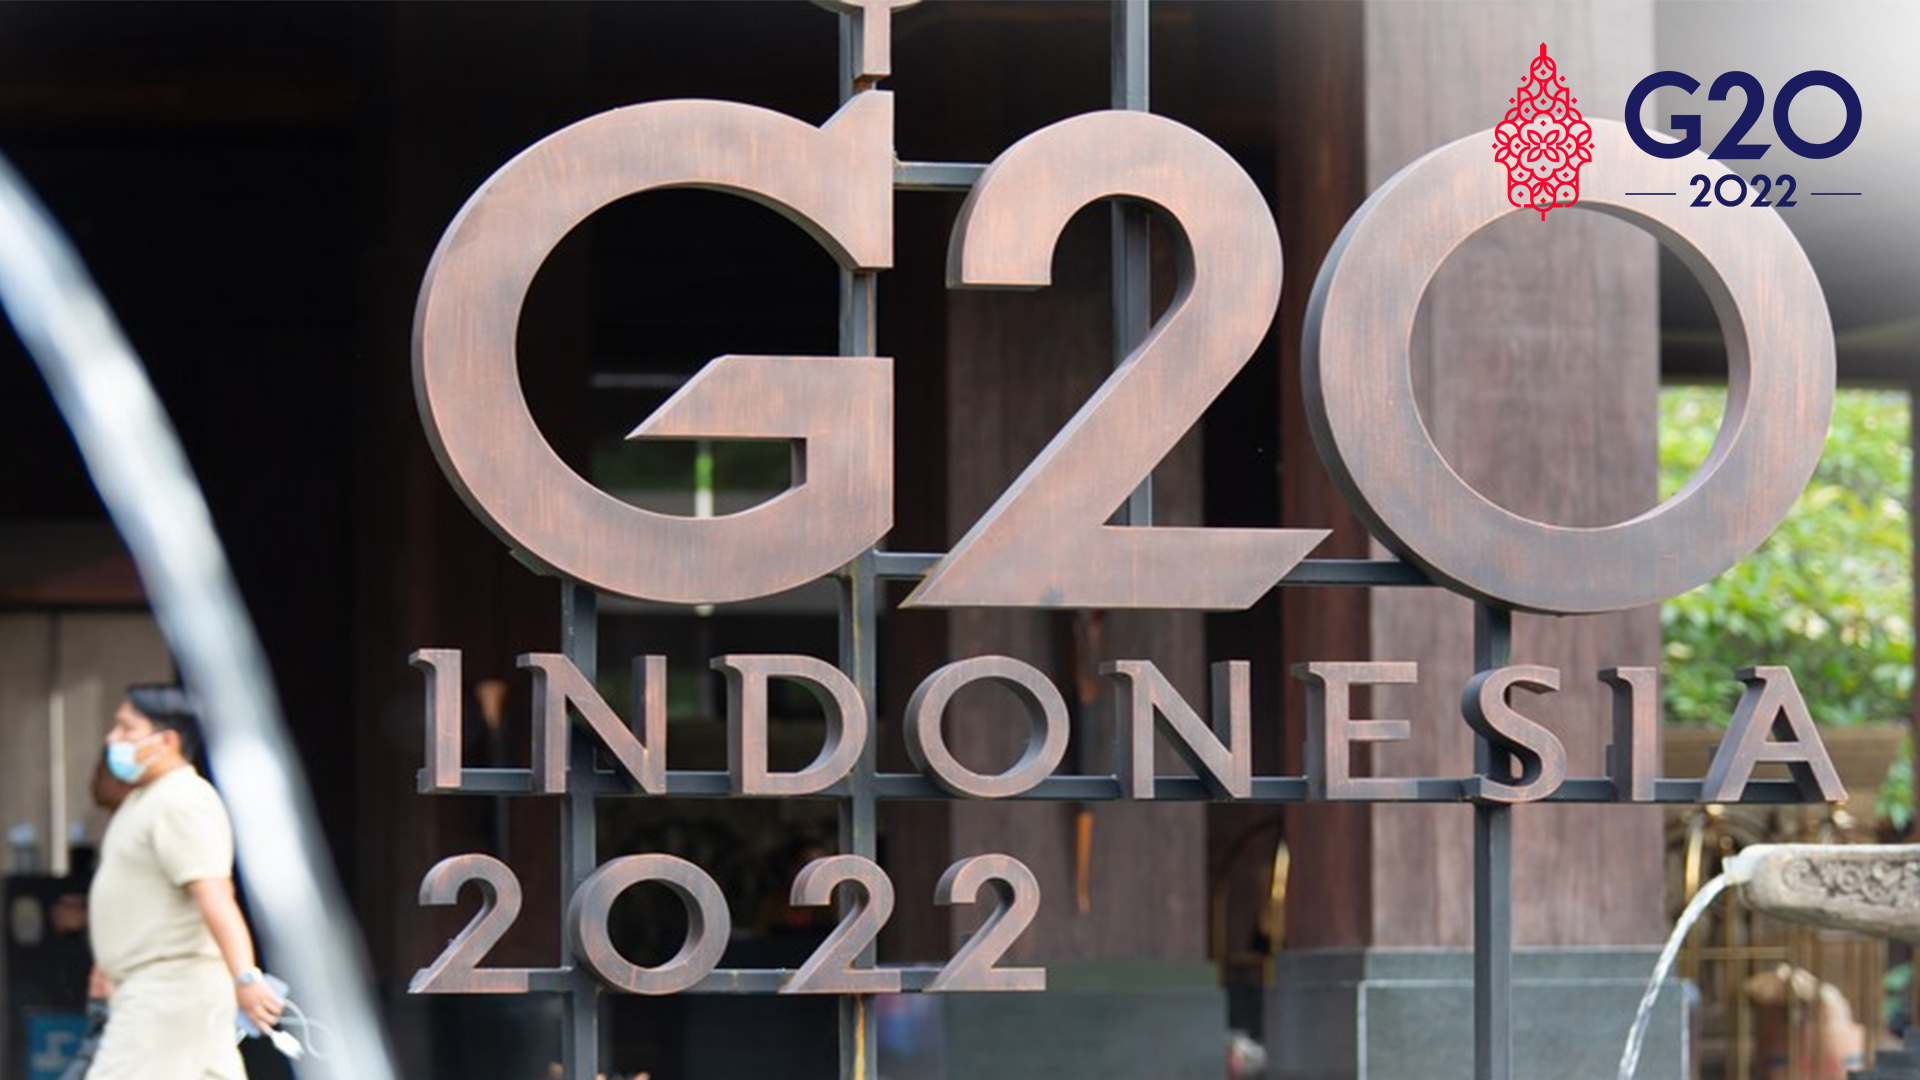 Live: Special coverage of G20 Summit working session III